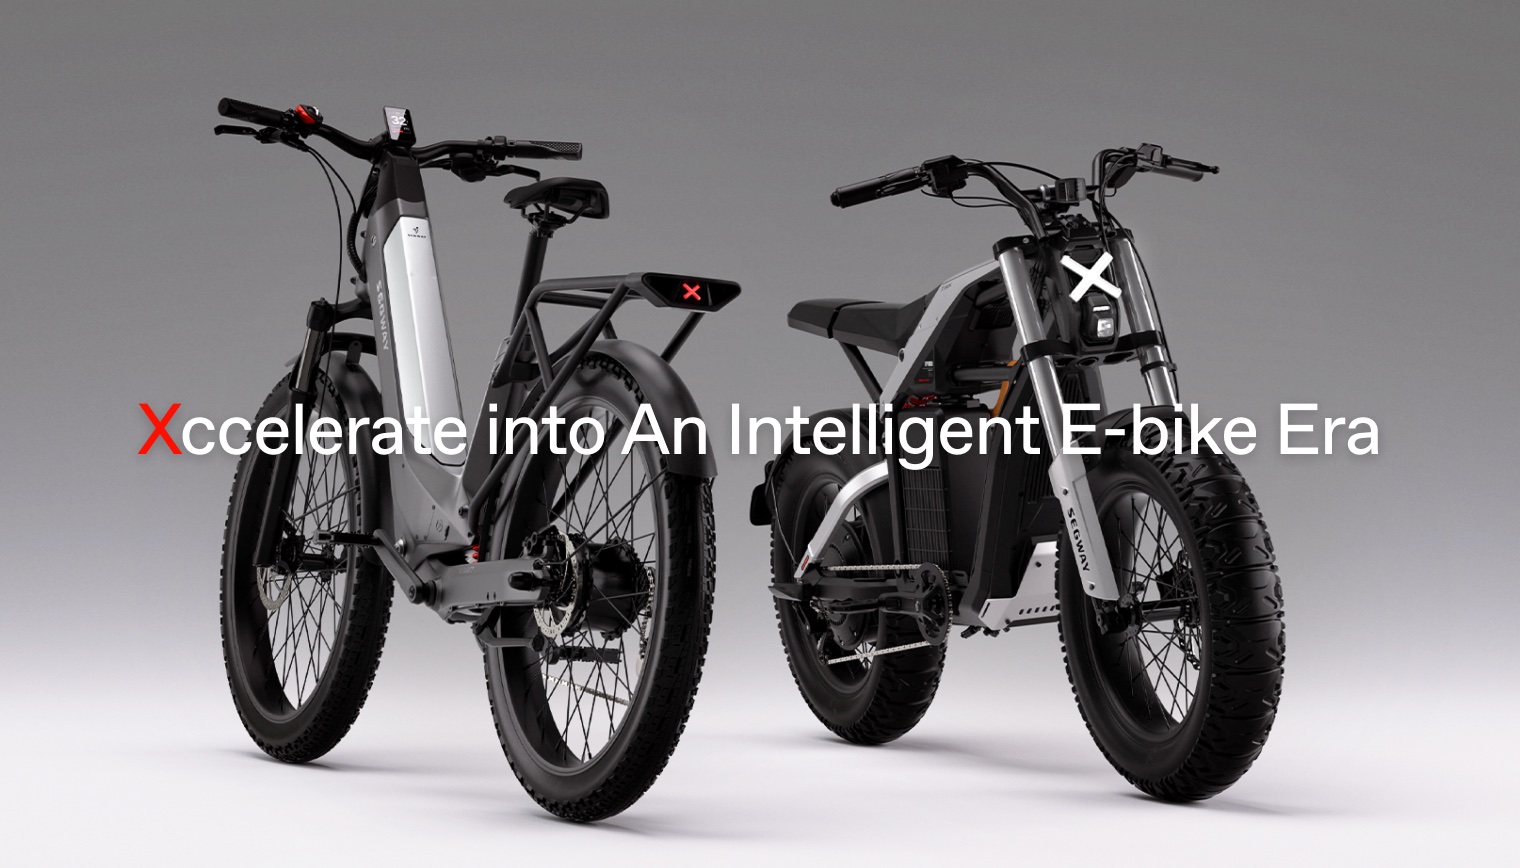 Segway focussed on intelligent e-bikes during the CES 2024 event